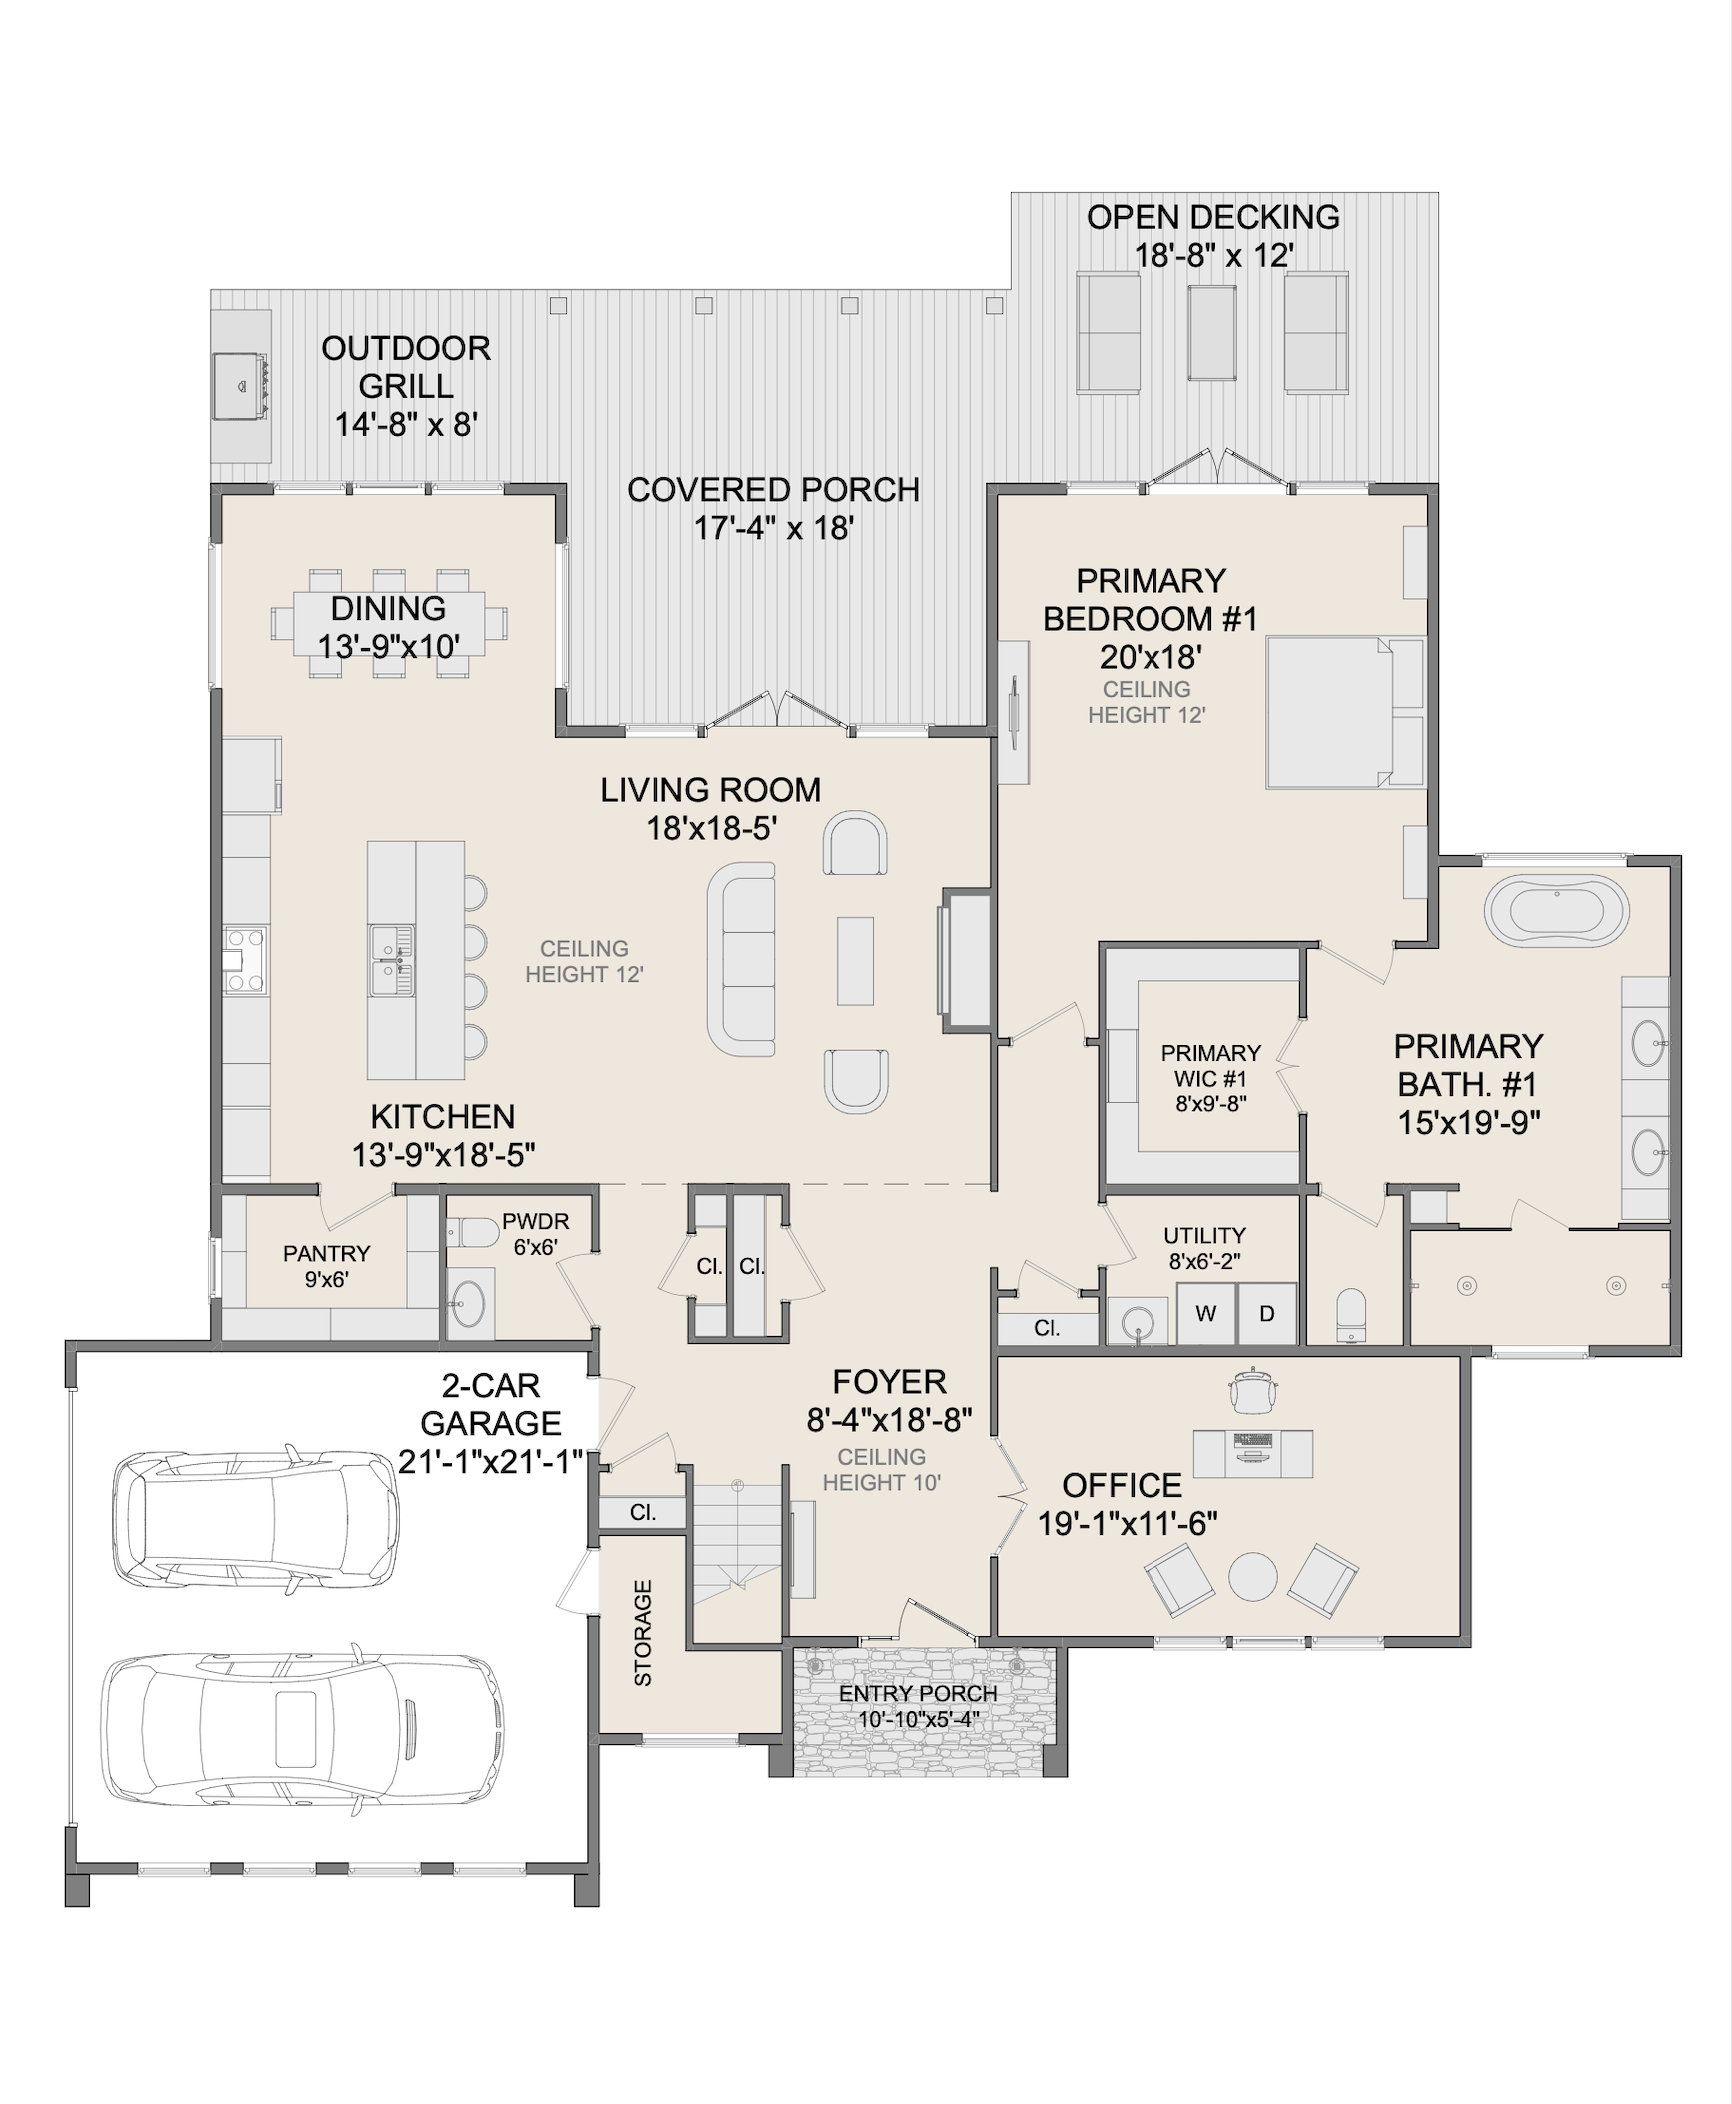 THE SILVER BIRCH HOUSE. Floor Plans for Family Houses, New House Plans